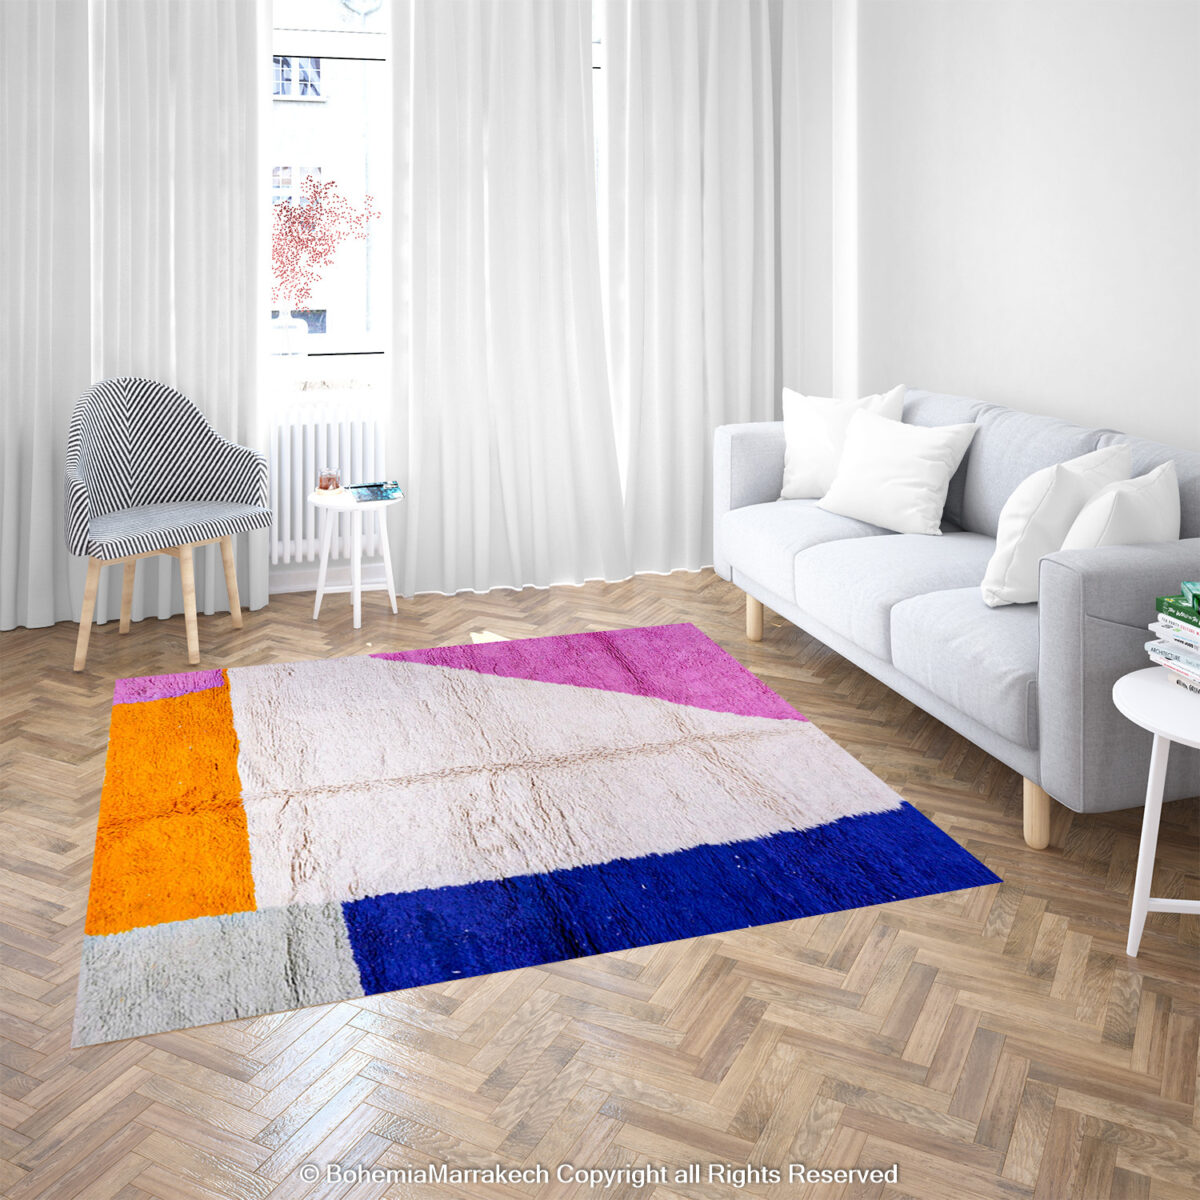 blue rugs for bathroom, area rug with navy blue, living room rug white, living room white rug, orange and blue carpet, Calvin Klein white rug, rug orange and blue, rug blue orange, blue bathroom carpet, blue rug bathroom, white carpet fur, white rug in living room, light pink rug, black and white geometric rug, black and white rug 8x10, black and white runner rug, pink nursery rug, pink and grey rug, pink and white rug, blue runner rug, blue and yellow rug, white bathroom rugs, pink bathroom rugs, yellow and grey rug, blue and green area rug, pink and gray rug, yellow and gray rug, blue green area rug, blue carpet runner, black white area rug, blue yellow rug, pink grey rug, yellow grey rug, light pink carpet, black white geometric rug, white and black geometric rug, pink white rug, black white runner rug, black and white carpet runner, yellow gray rug, black white rug 8x10, pink gray rug, pink and white carpet, 8x10 rug black and white, blue and yellow carpet, black and white geo rug, pink and grey carpet, yellow and grey carpet, white and black 8x10 rug, rugs gray and yellow.